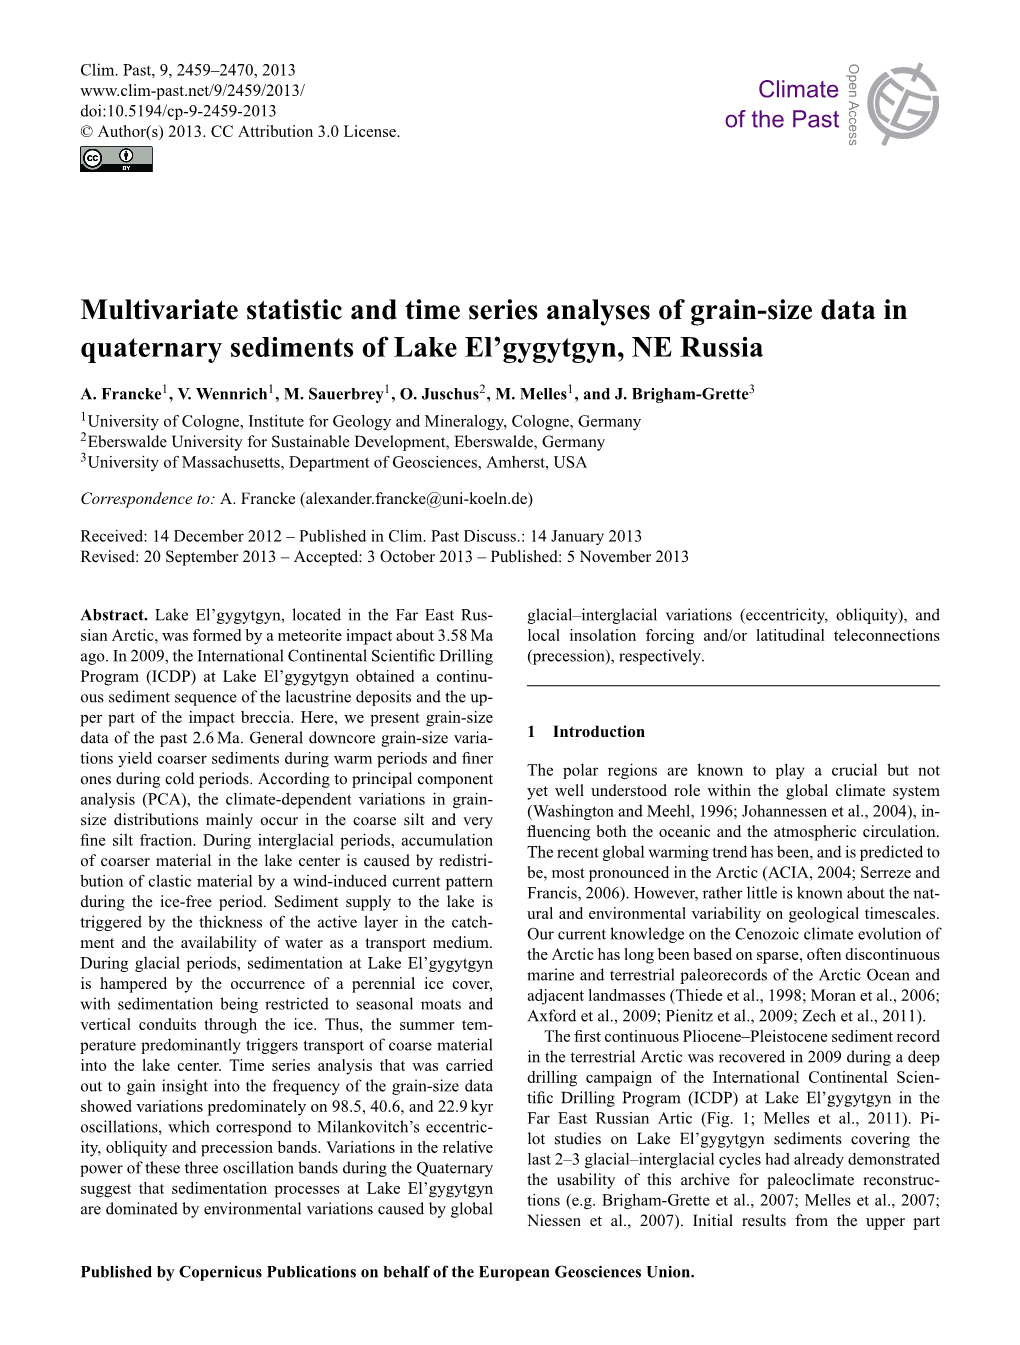 Multivariate Statistic and Time Series Analyses of Grain-Size Data in Quaternary Sediments of Lake El’Gygytgyn, NE Russia